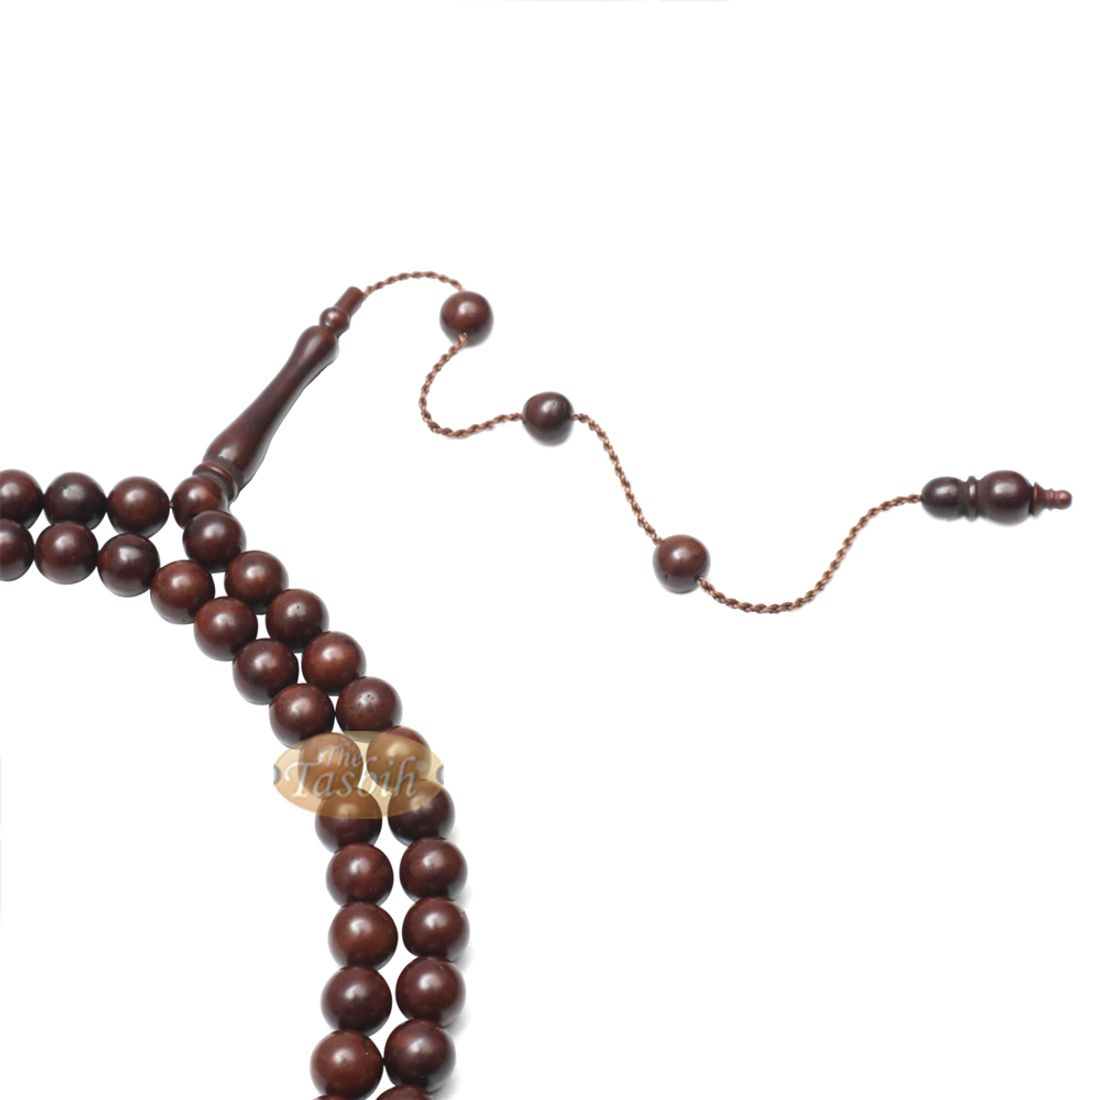 Unique Antique Natural Color 8mm Turkish Kokka – Kuka Seed Prayer Beads – Rosary – Misbaha